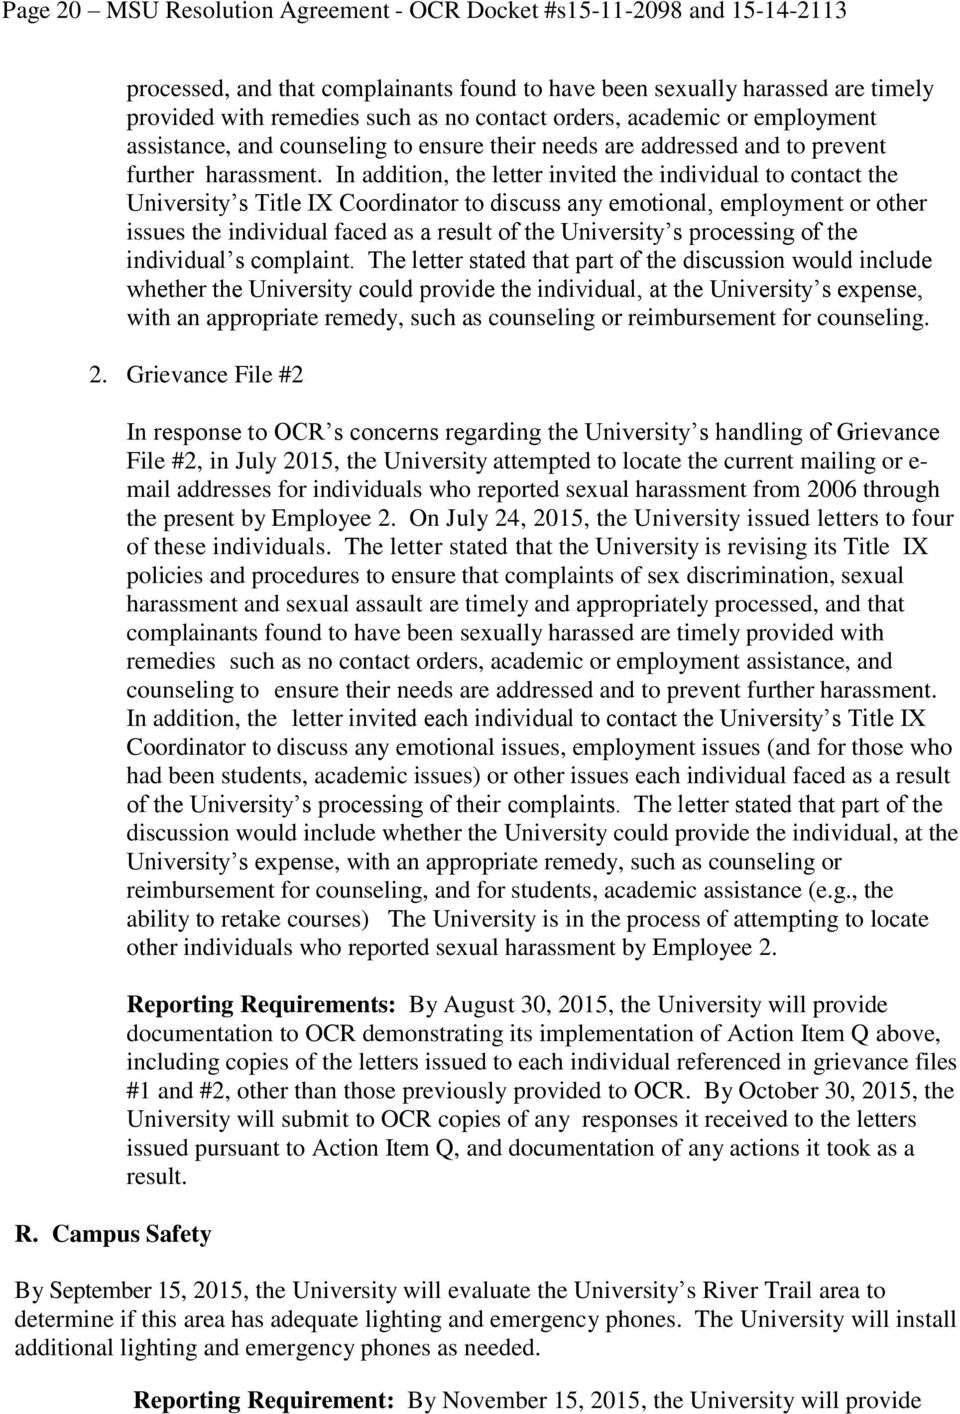 In addition, the letter invited the individual to contact the University s Title IX Coordinator to discuss any emotional, employment or other issues the individual faced as a result of the University